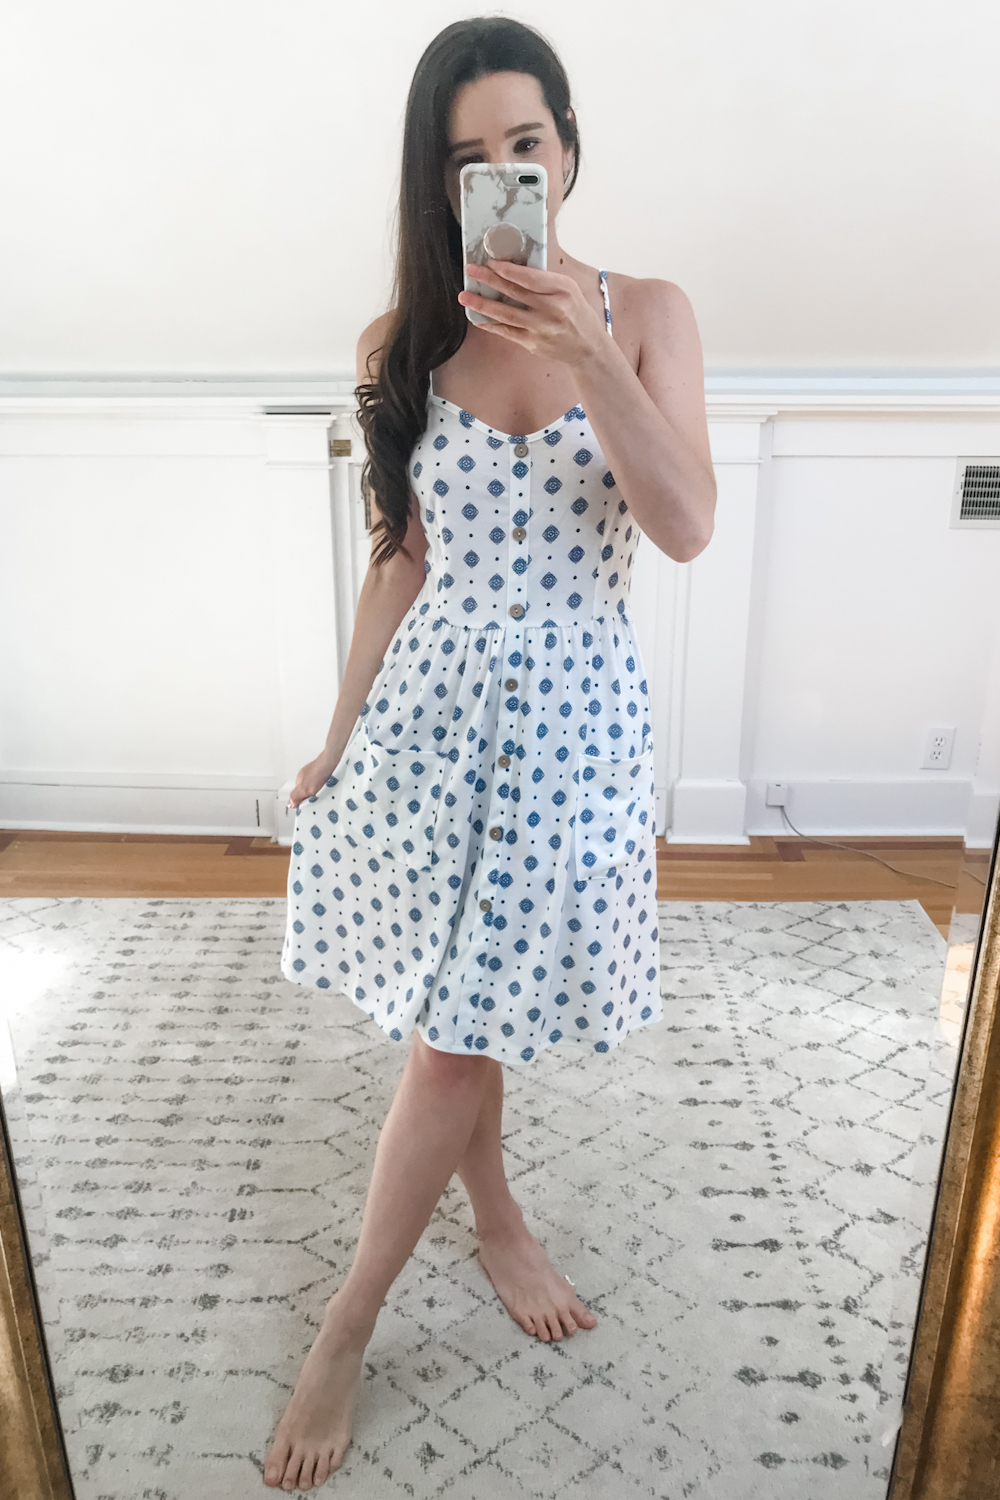 Amazon blue and white button down sundress with pockets tried on by affordable fashion blogger Stephanie Ziajka on Diary of a Debutante